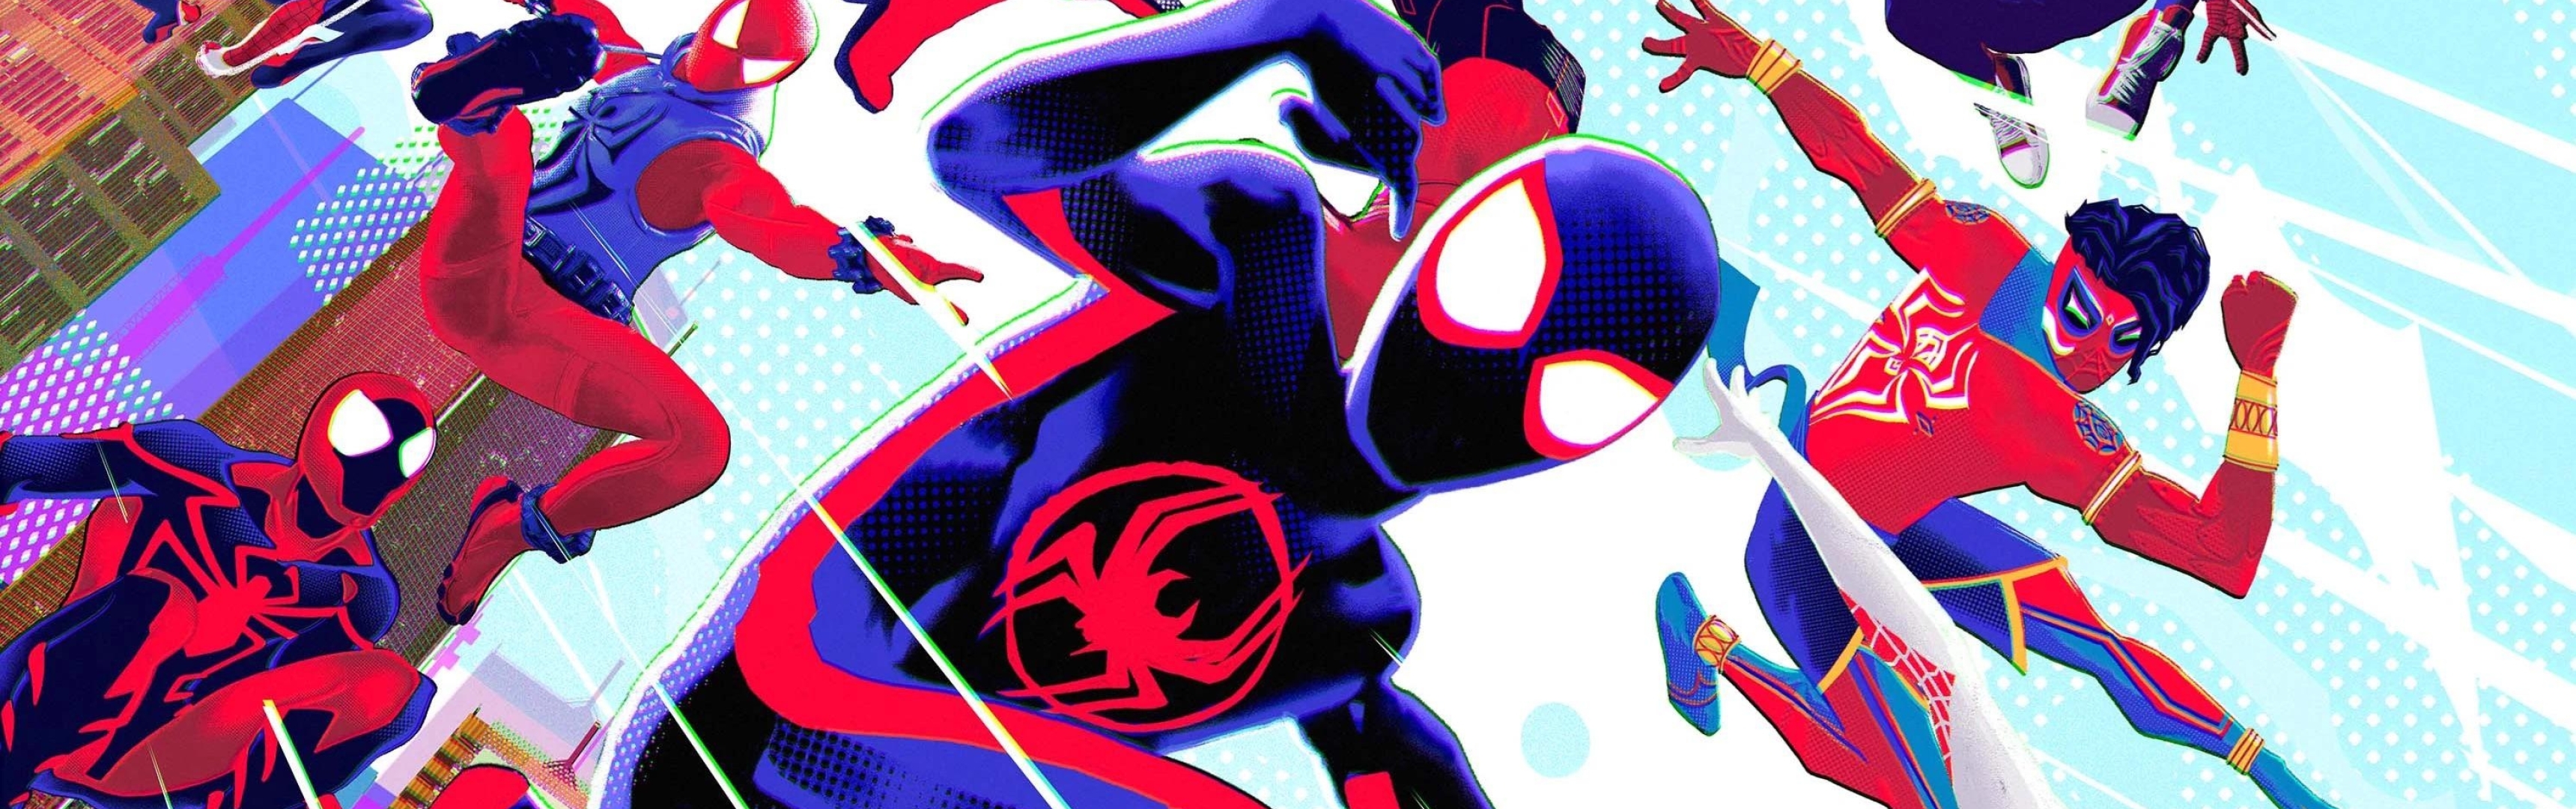 3440x1080 Resolution All Spider-Man from Across the Spider-Verse ...